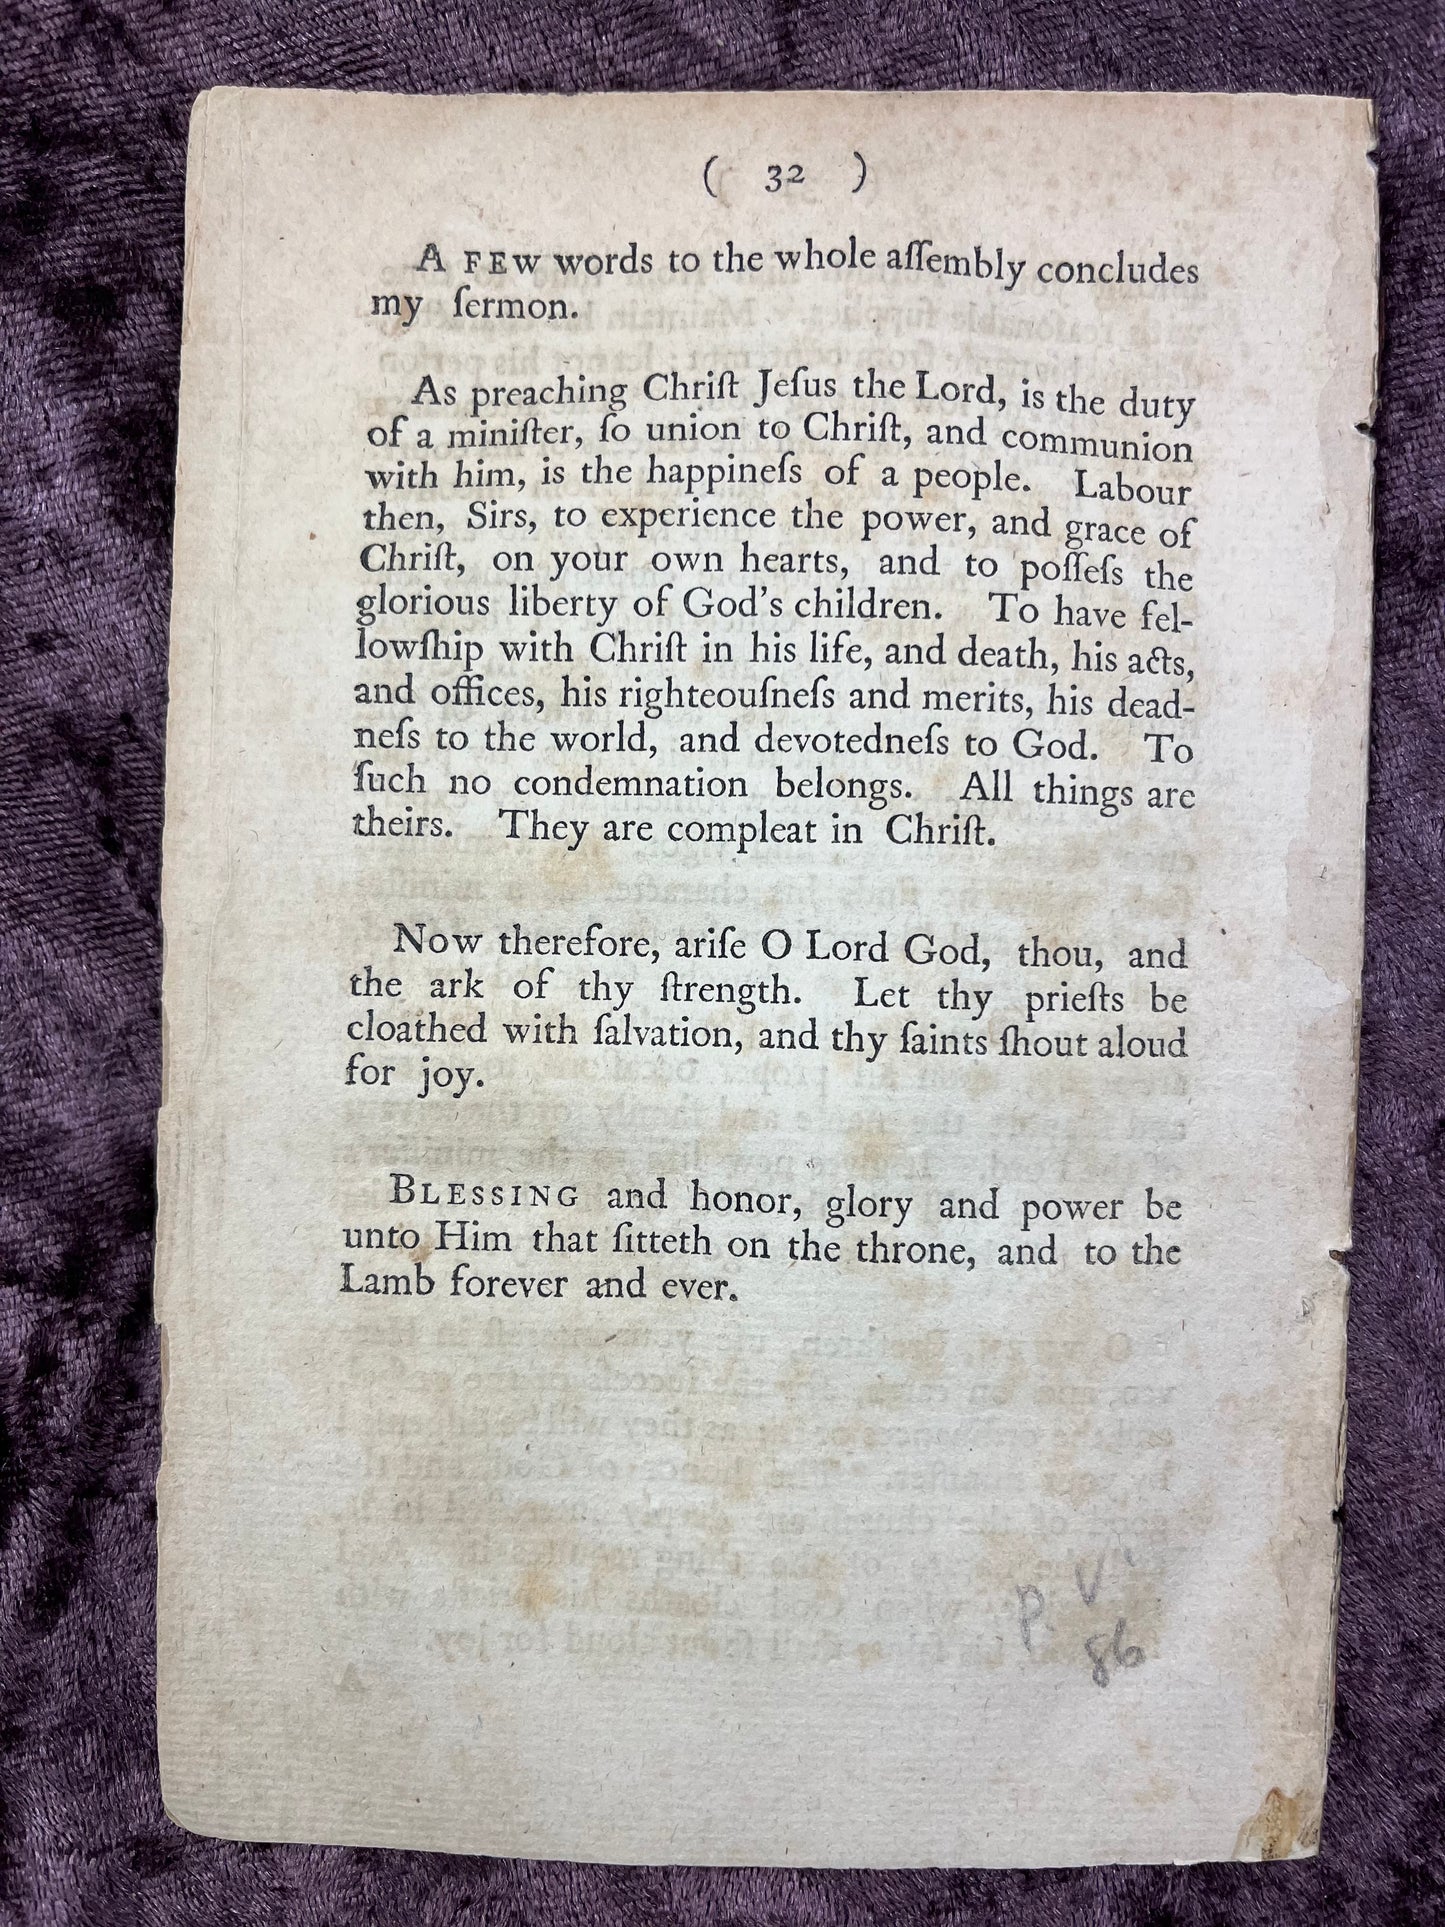 1761 Octavo First Edition Pamphlet Sermon Preached At The Ordination Of Reverend Mr. Eliab Stone To The Pastoral Care Of The Second Church By Matthew Bridge-The Reverend Who Resembled George Washington